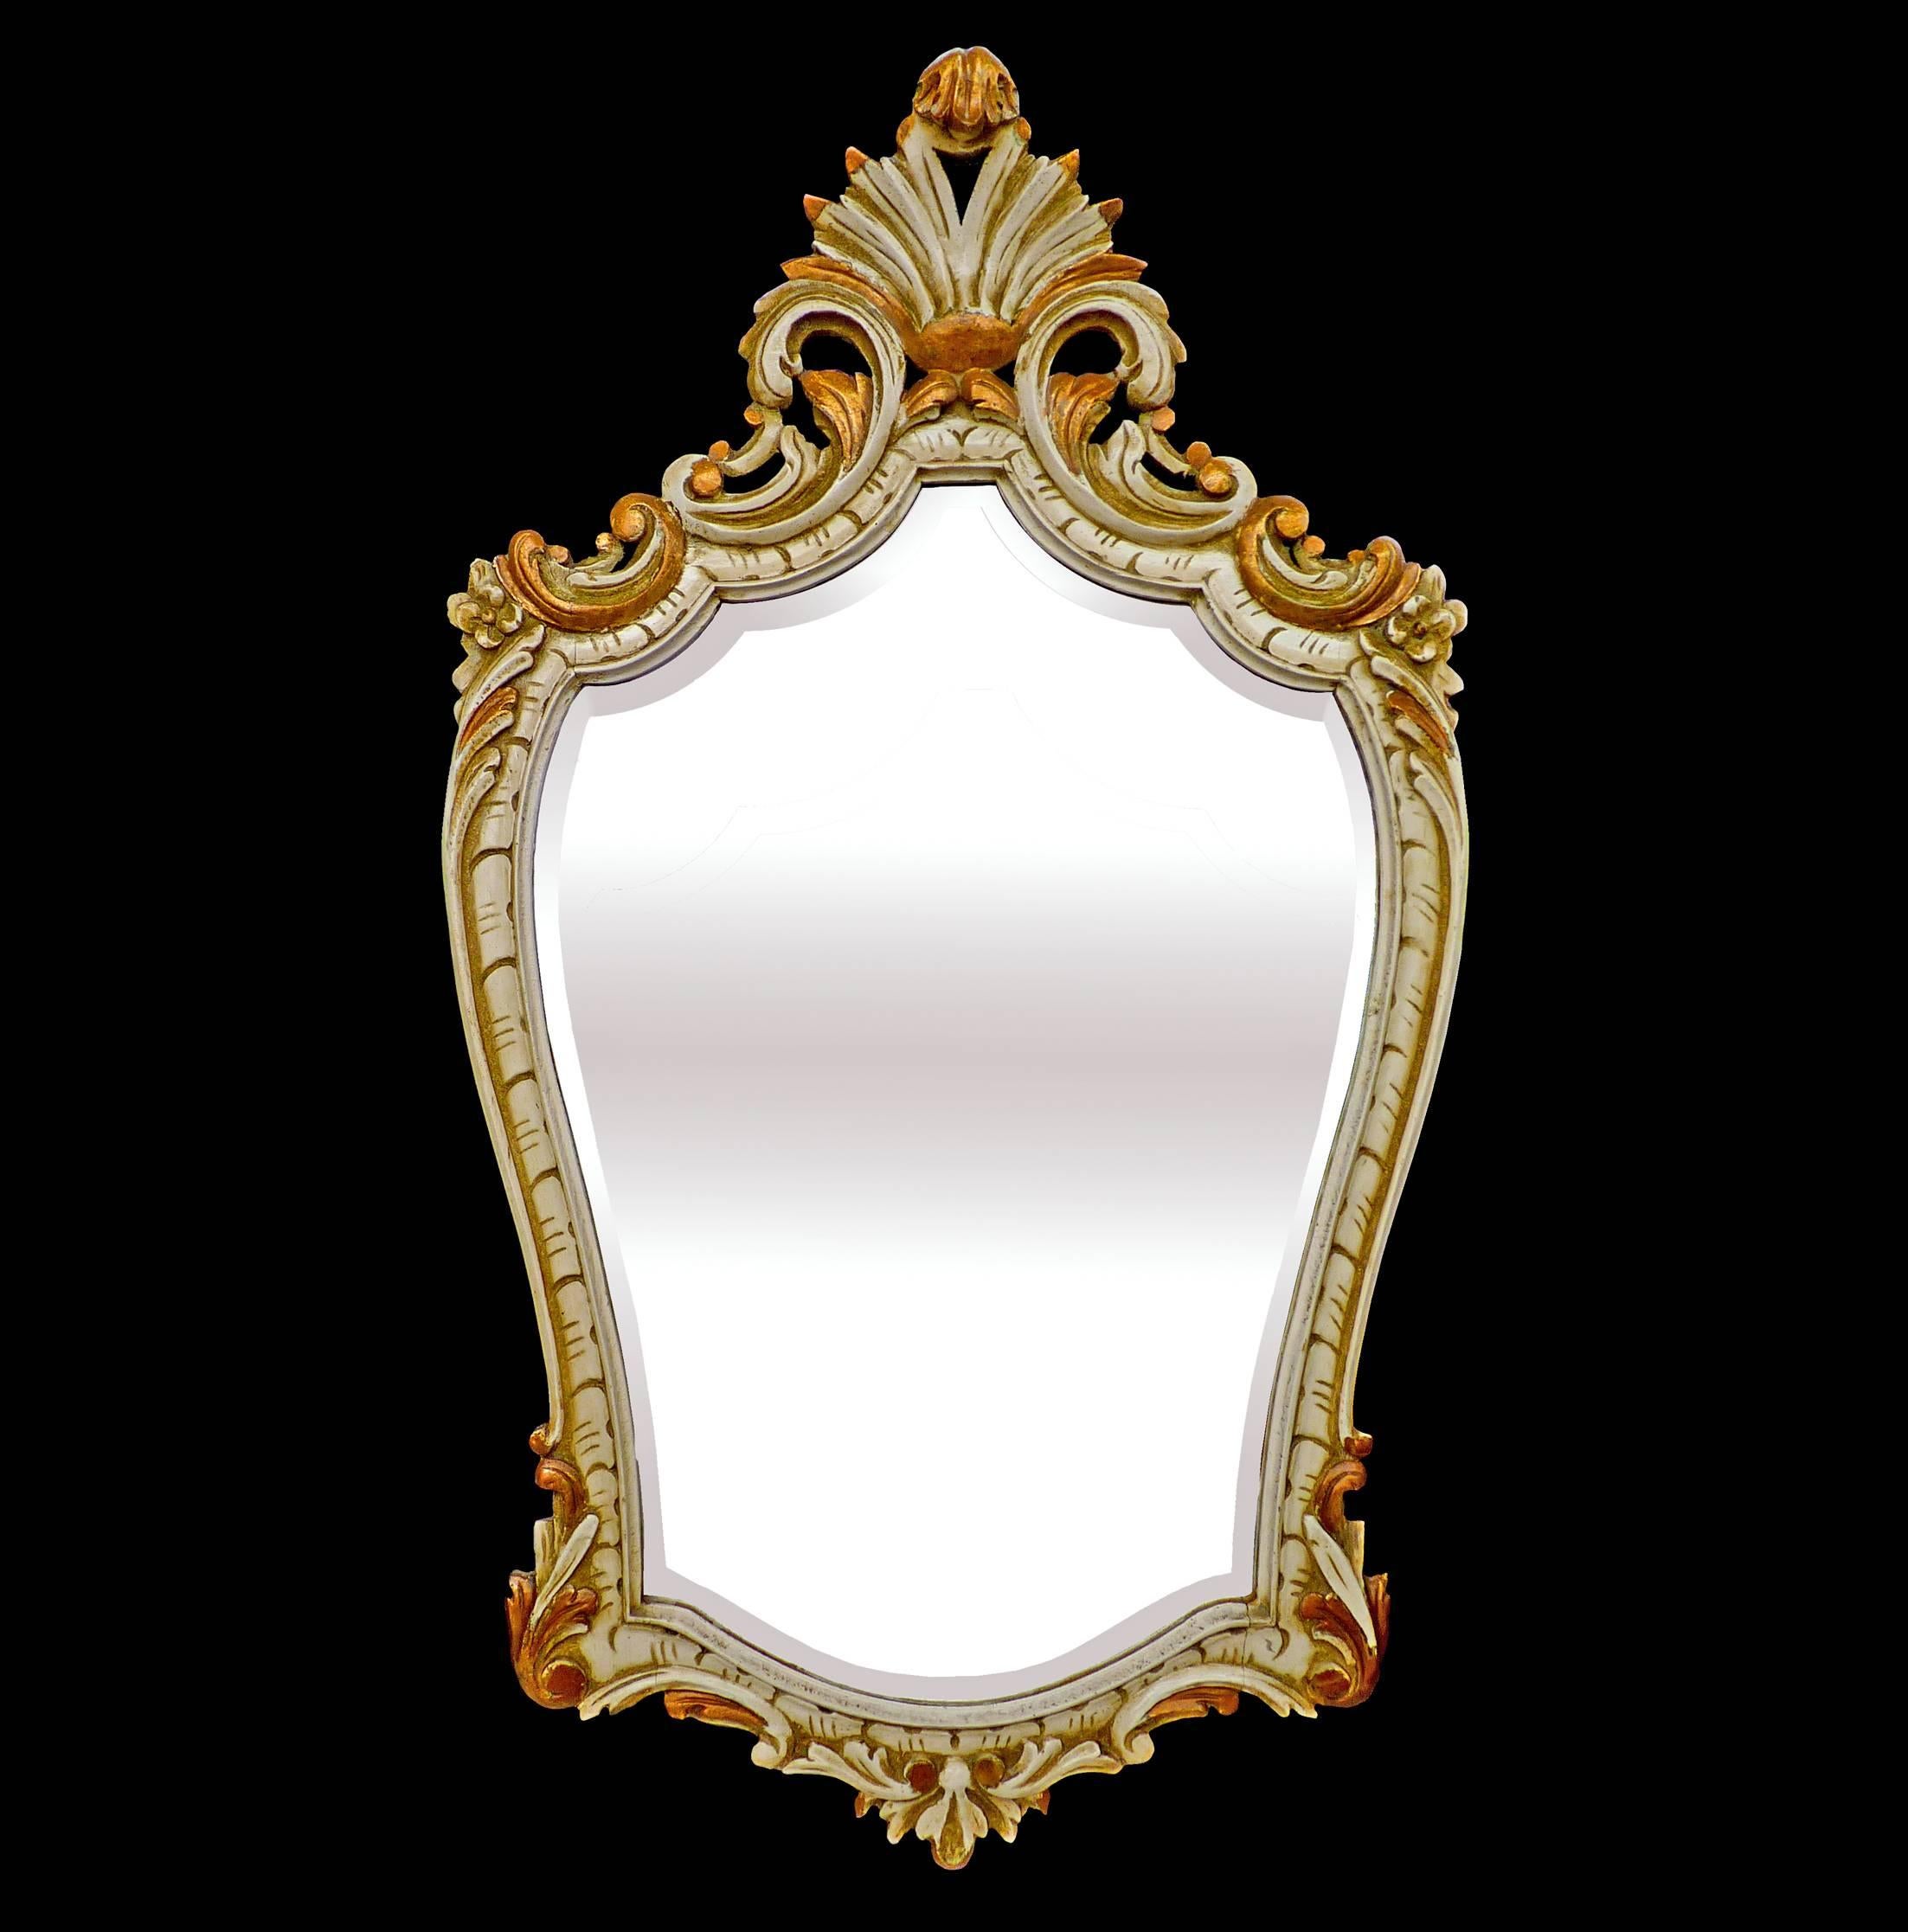 Antique Louis XV style gilded and painted wood mirror with hand carved shell and floral elements
beveled mirror

Measures:
Width 22 in / 56 cm
Height 40 in / 100 cm
Weight 11 lb. (5.5 kg).